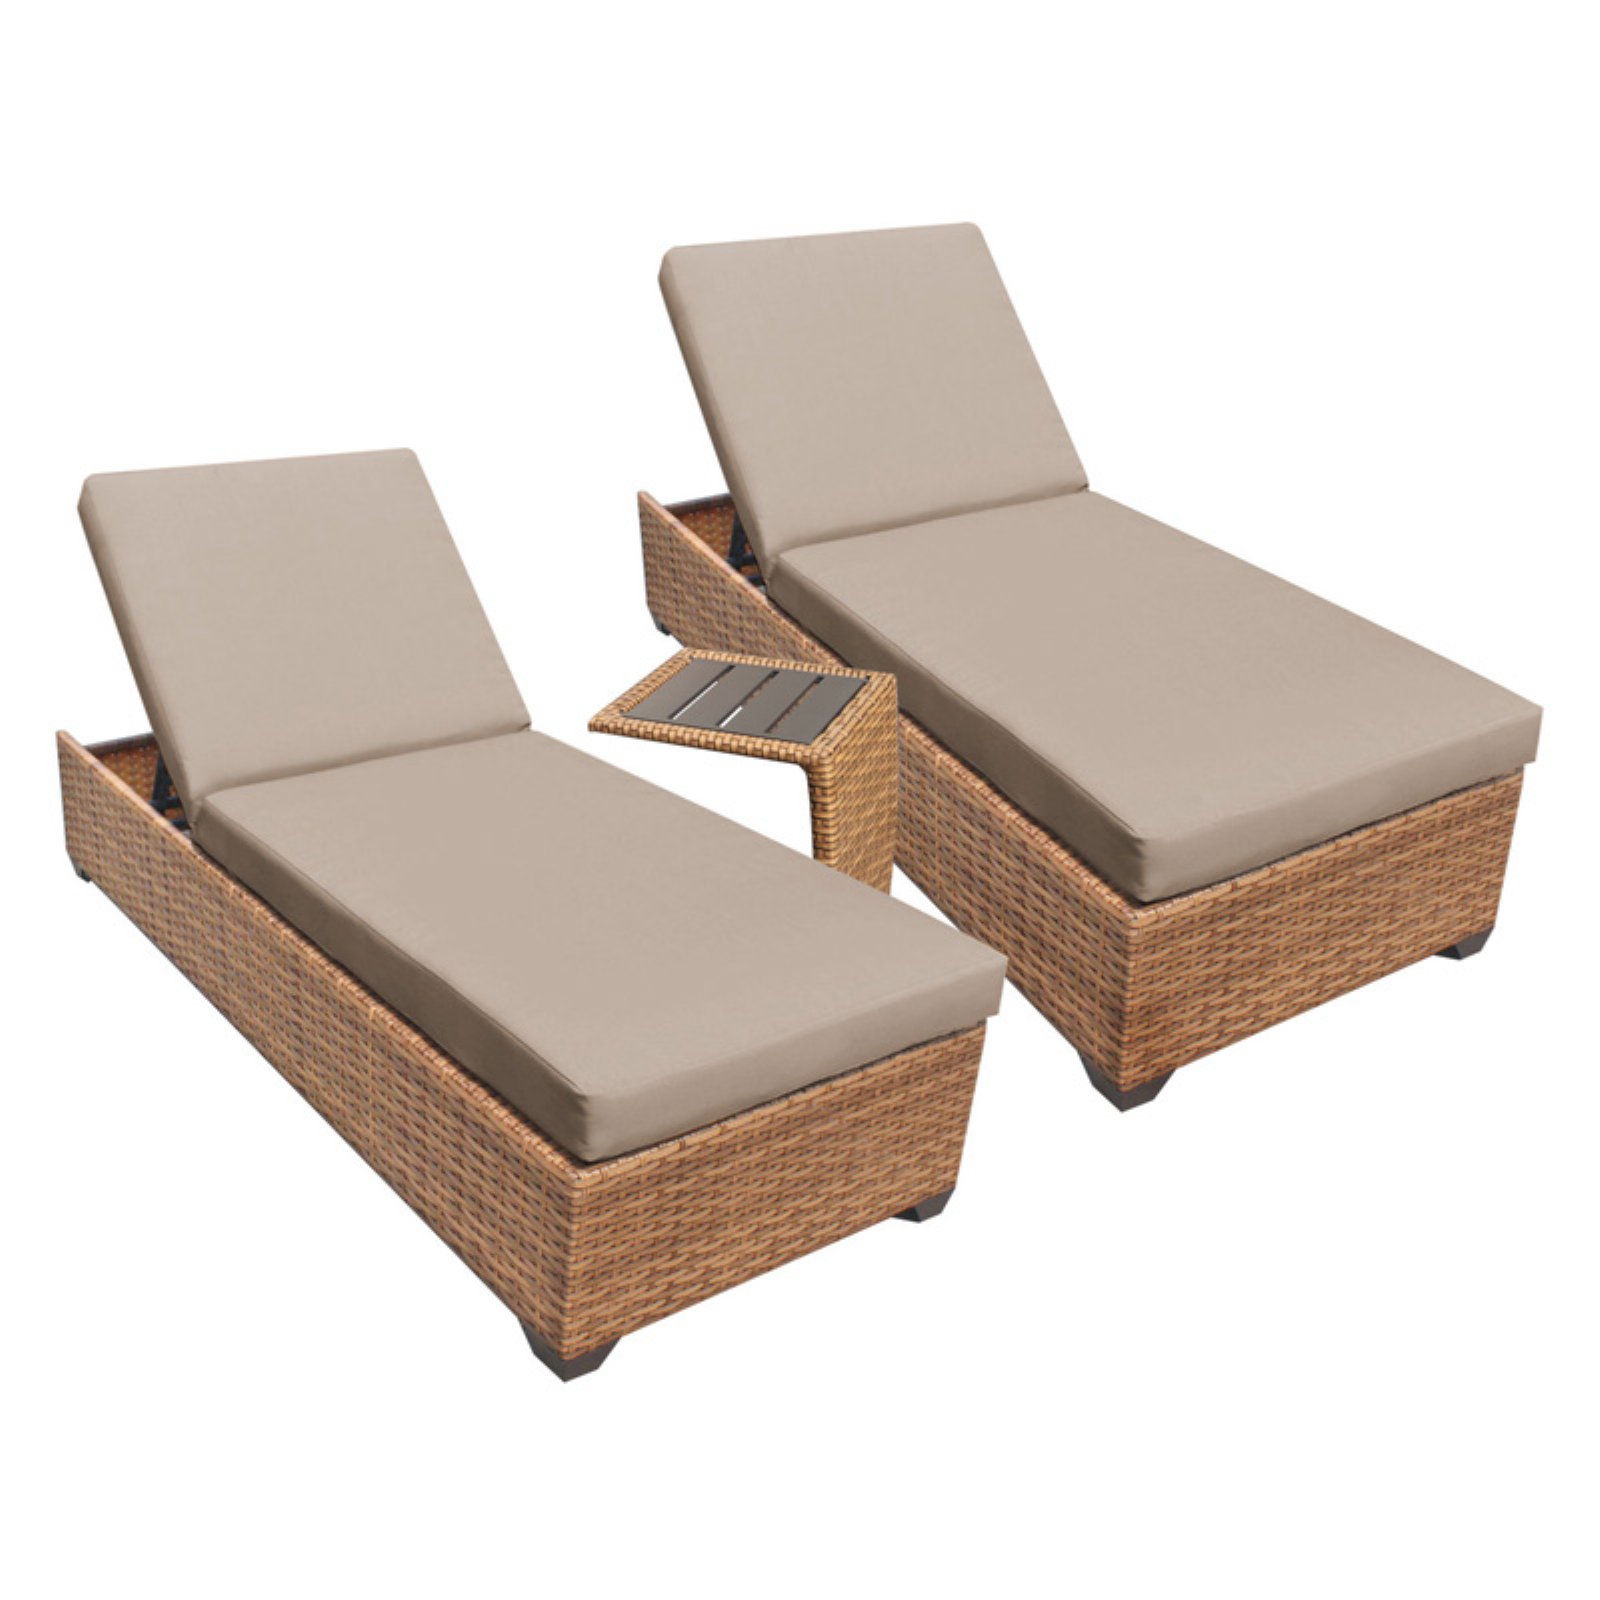 Laguna Chaise Set of 2 Outdoor Wicker Patio Furniture With Side Table - image 1 of 2